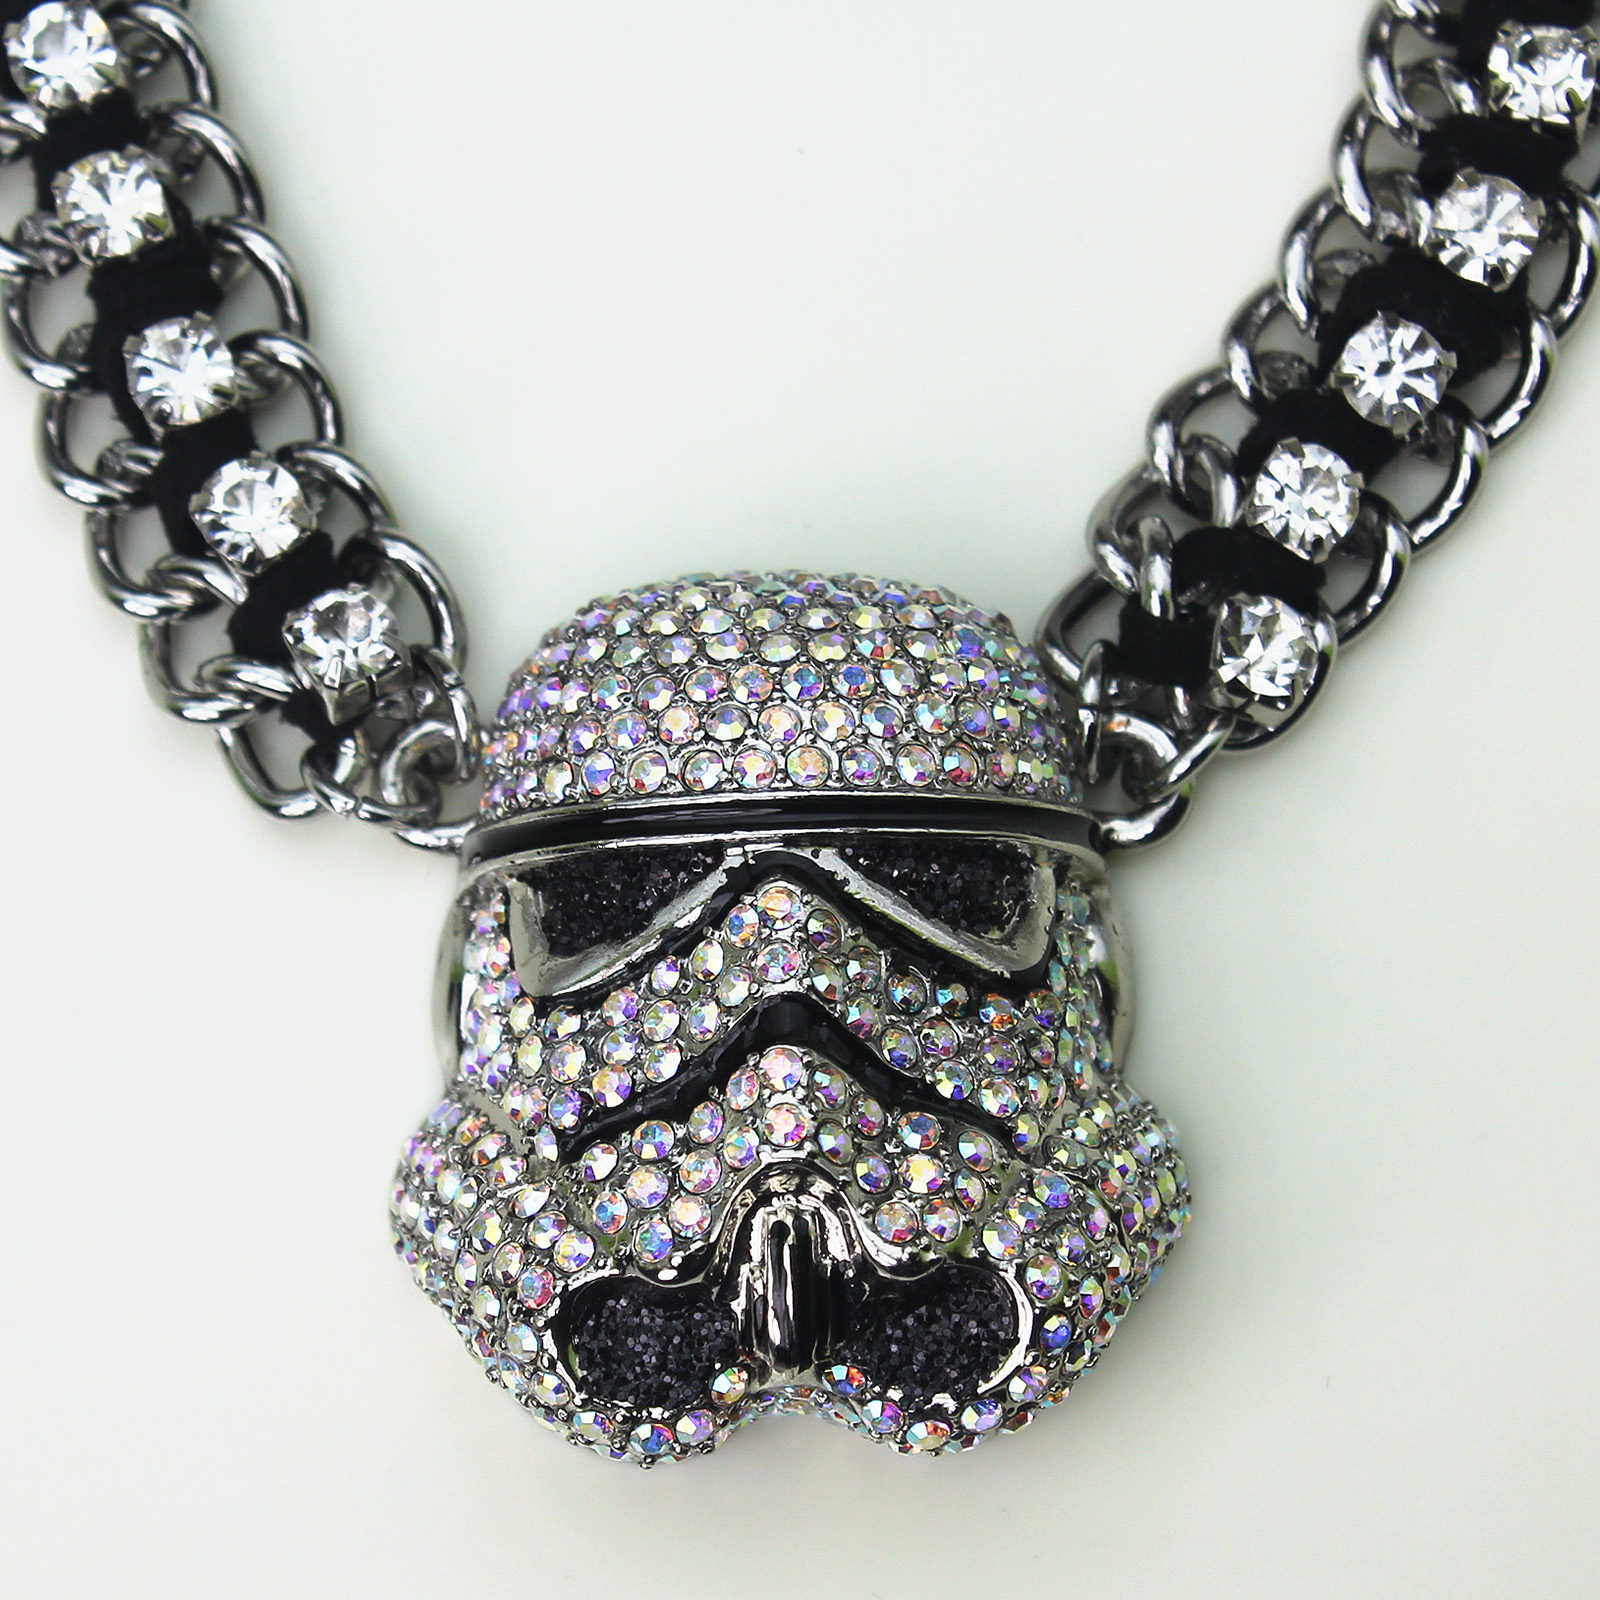 HSN - 'bling' Stormtrooper helmet necklace by SG@NYC, LLC 